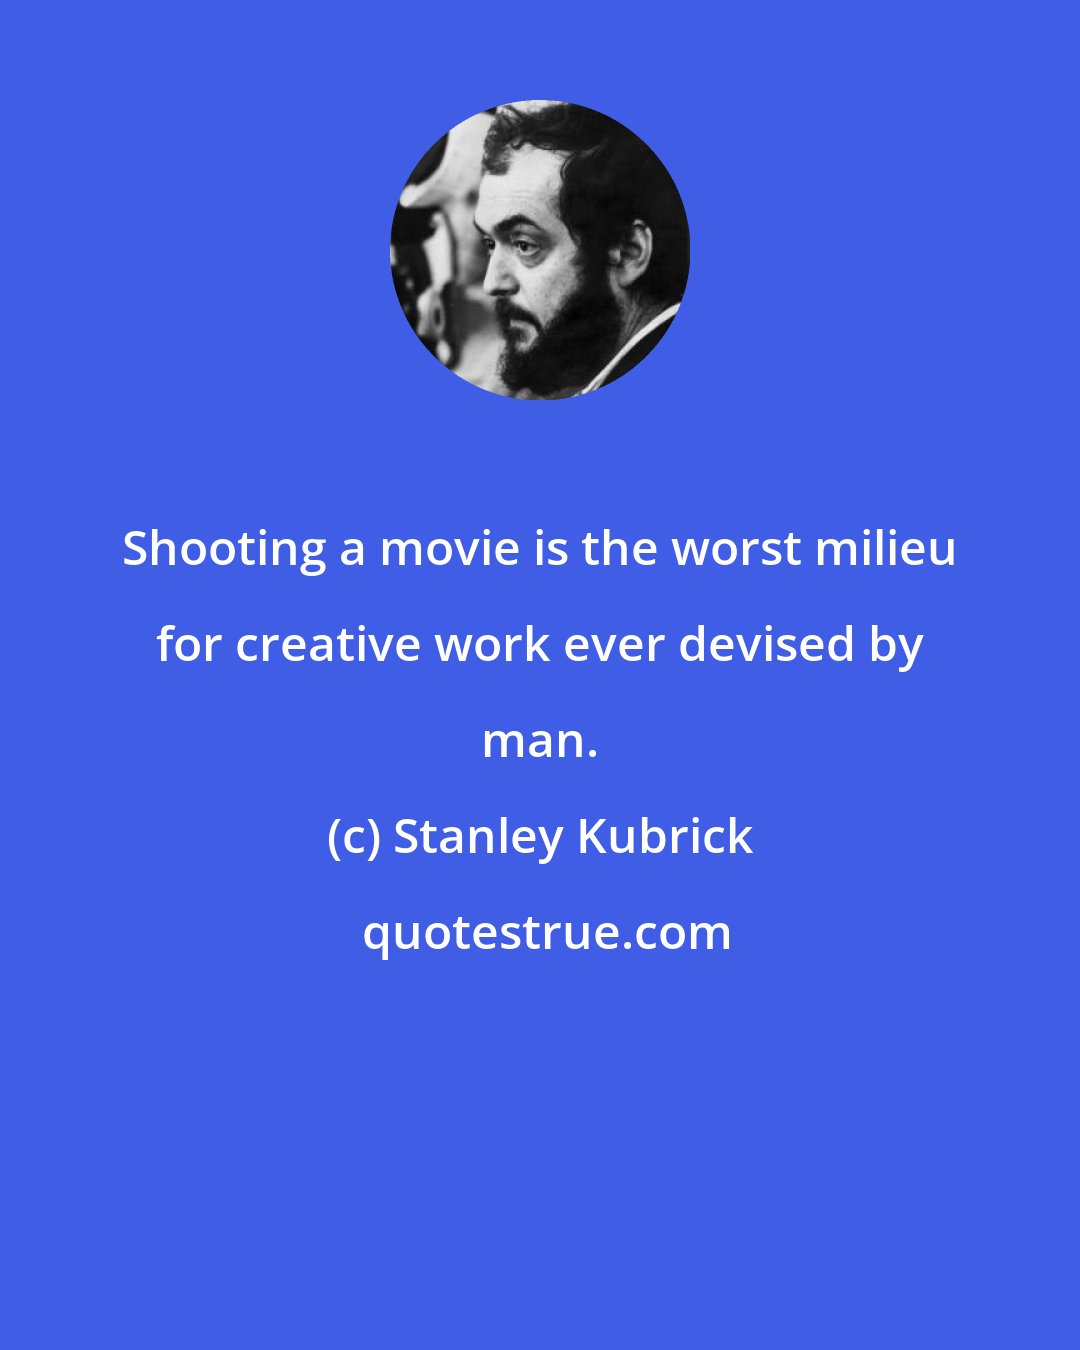 Stanley Kubrick: Shooting a movie is the worst milieu for creative work ever devised by man.